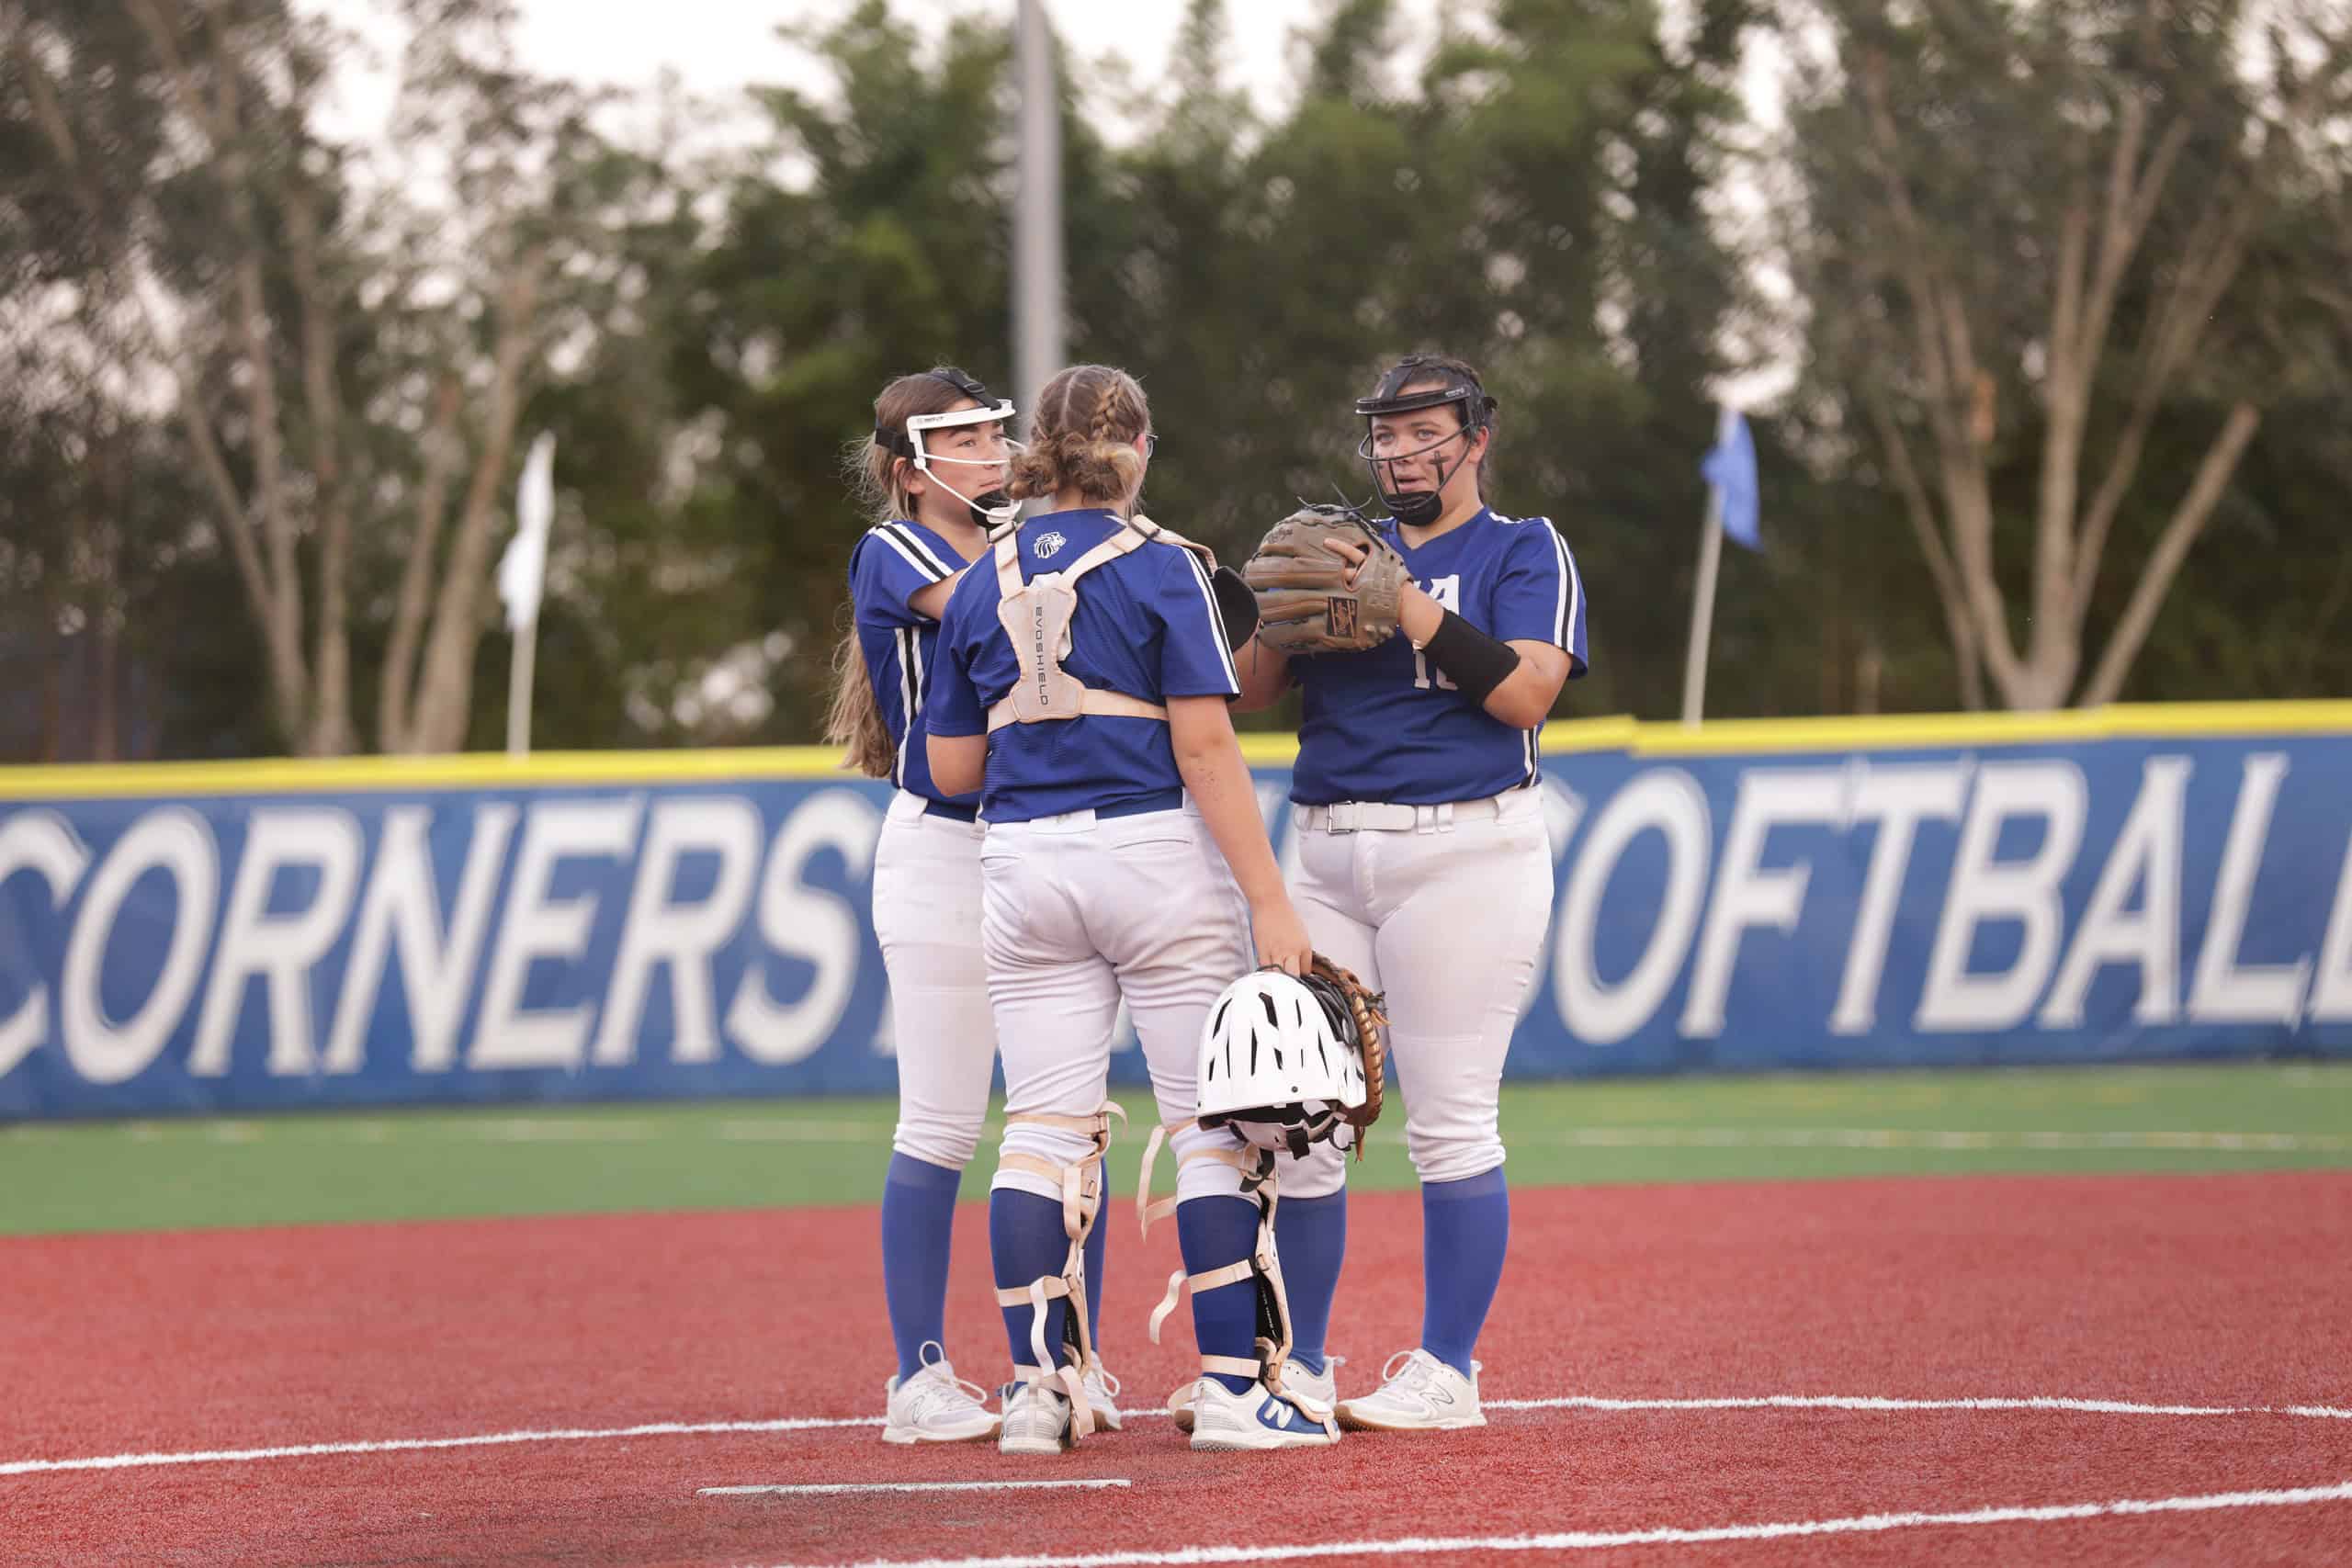 Lions' Shortstop Rae Easton, Pitcher Kaylana Lyons, and Catcher Piper Gill taking a timeout during Wednesday's postseason softball matchup. [Photo Provided by Sean Gill]